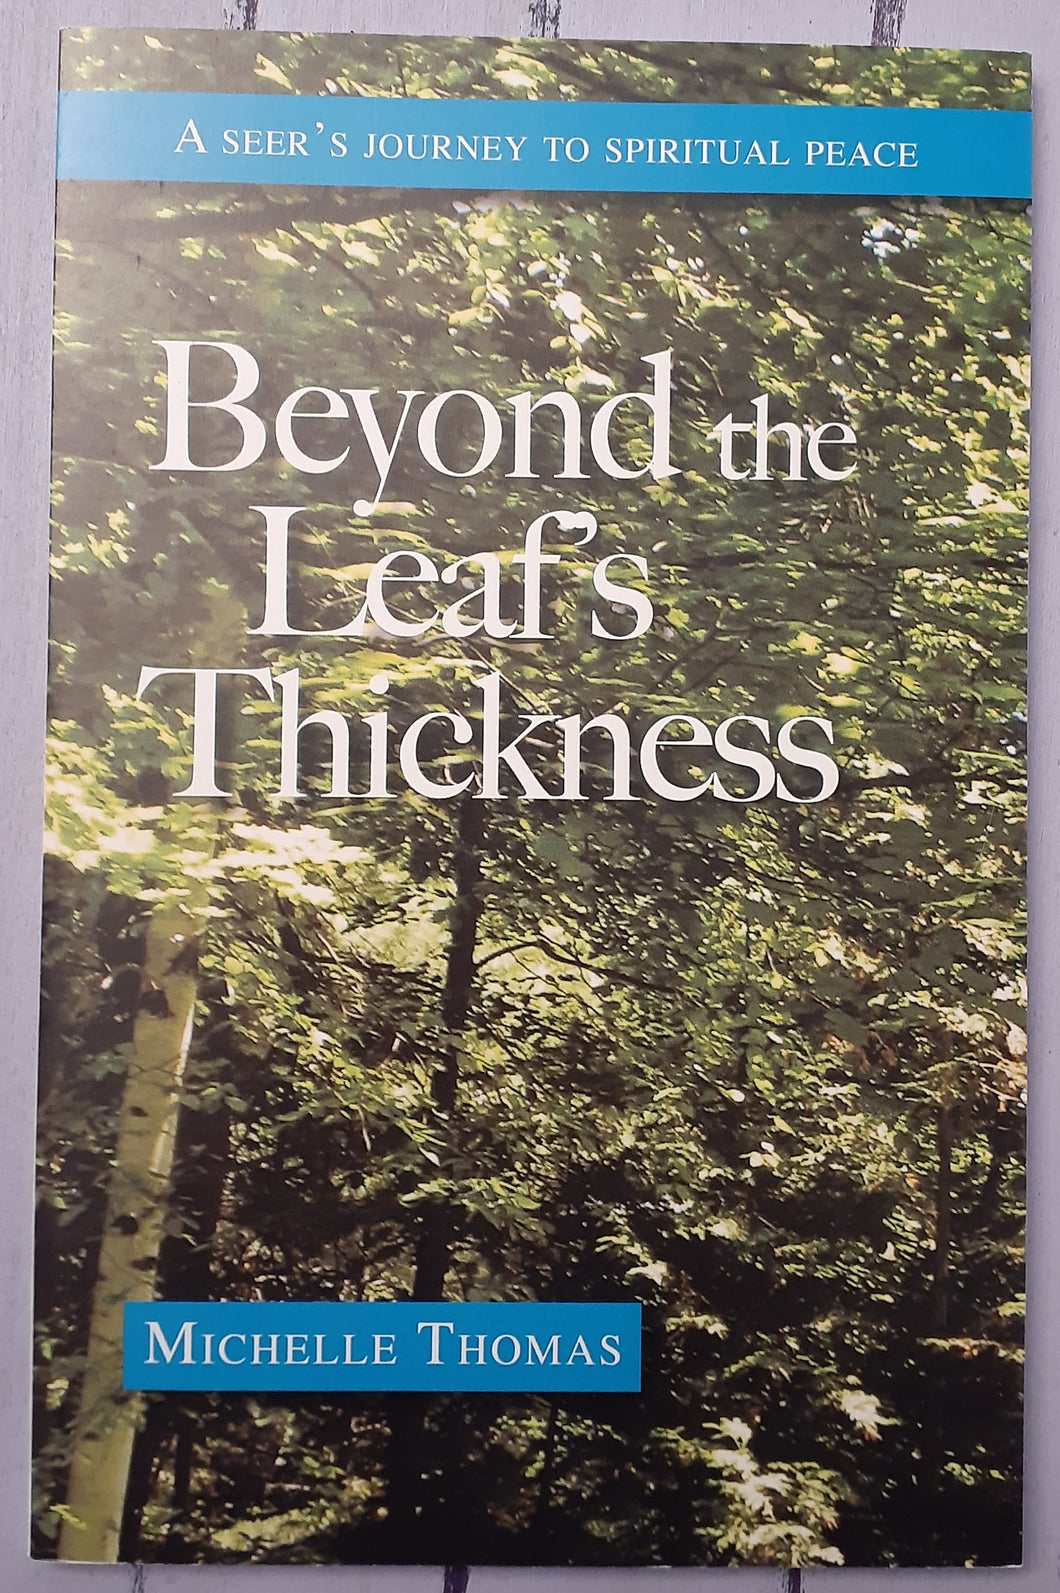 Beyond the Leaf's Thickness - A Seer's Journey to Spiritual Peace